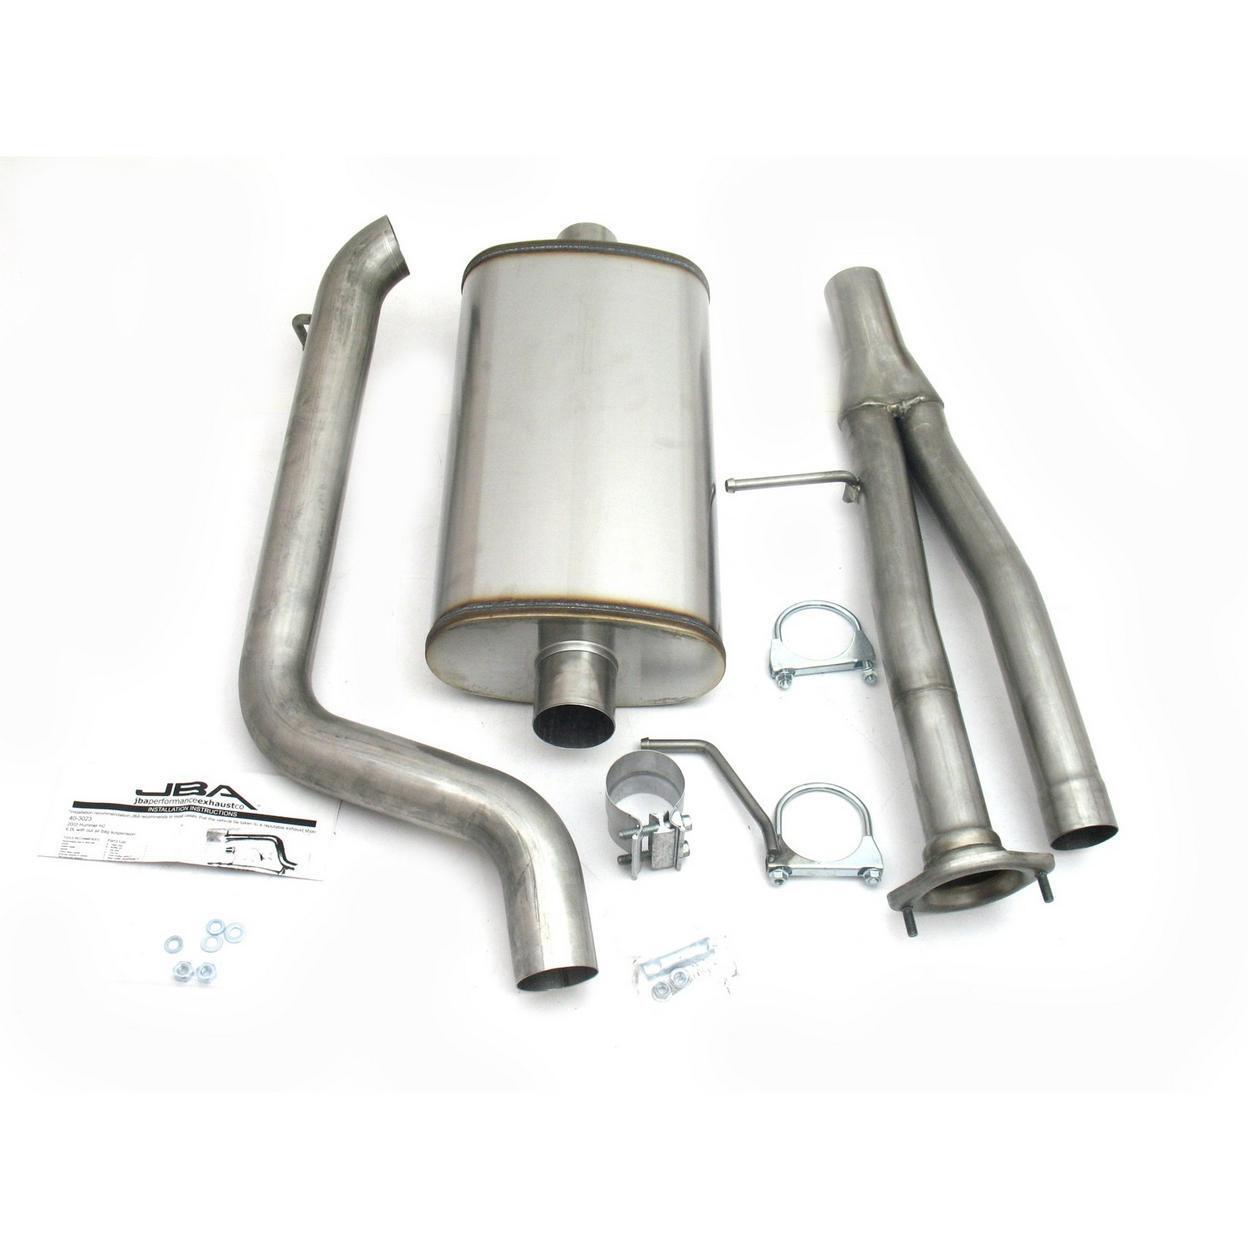 JBA Racing Headers Exhaust System Kit - Fits 03-06 Hummer H2 Fits 03-06 Hummer H